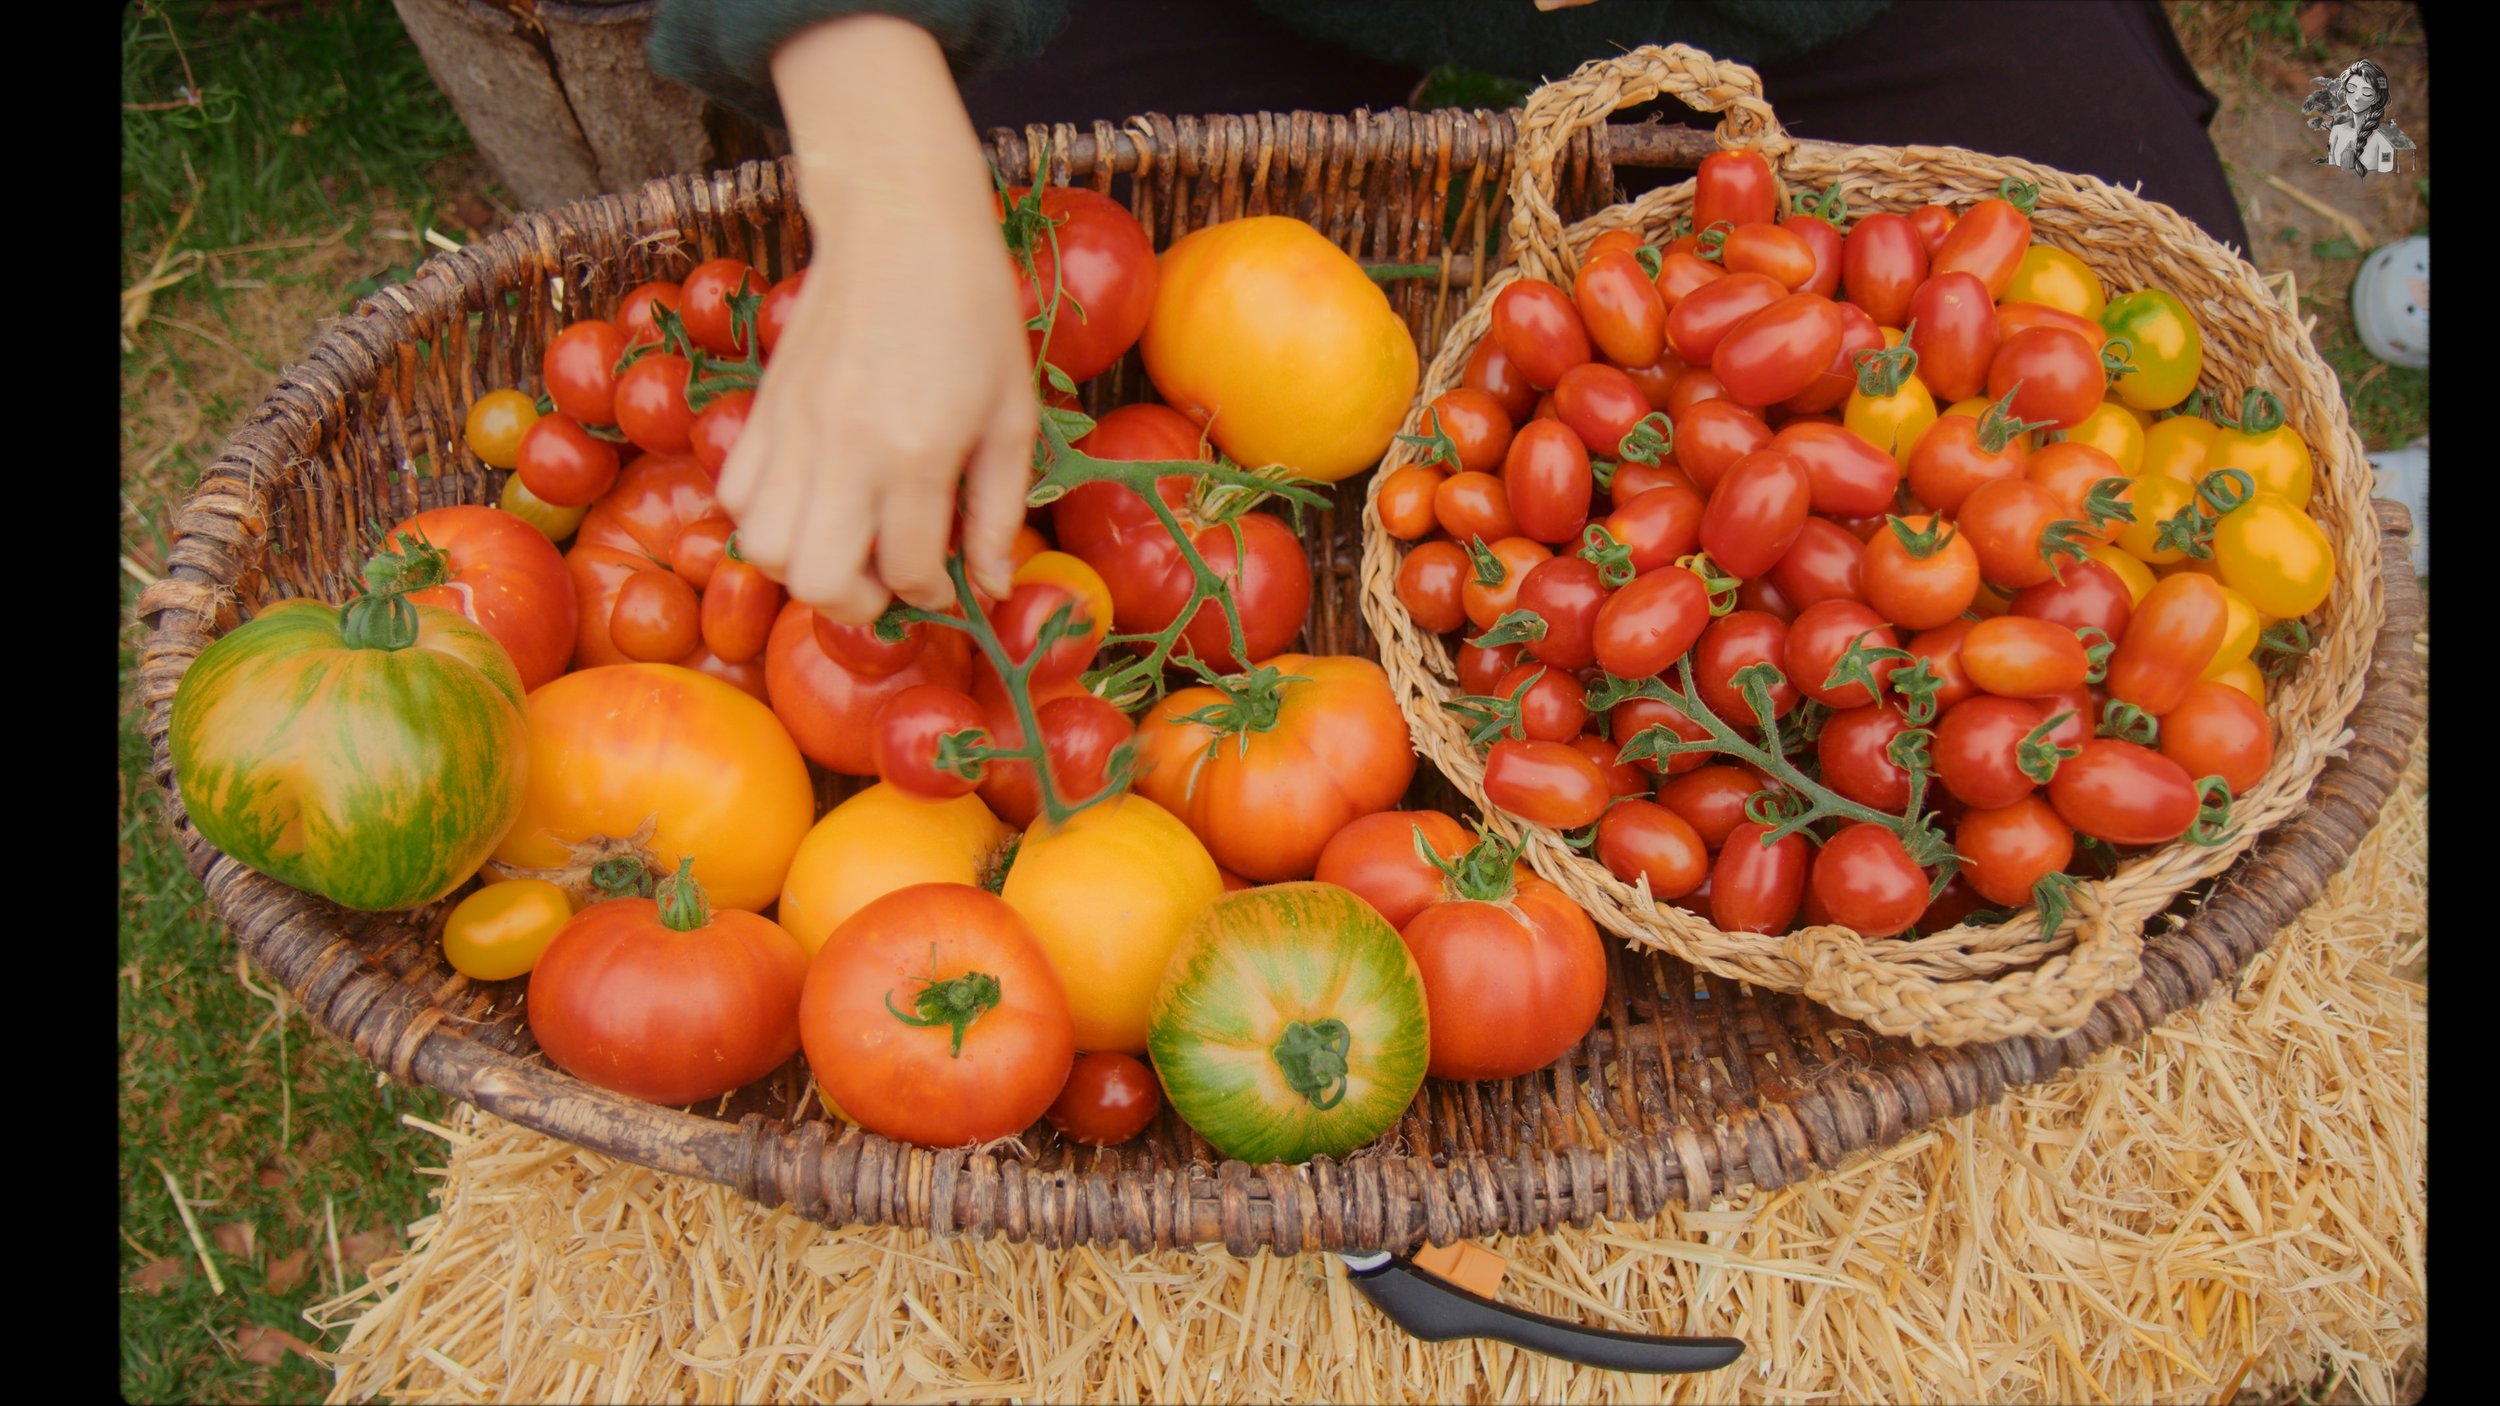 Everything About Growing Tomatoes - Her86m2 _1.259.1.jpg